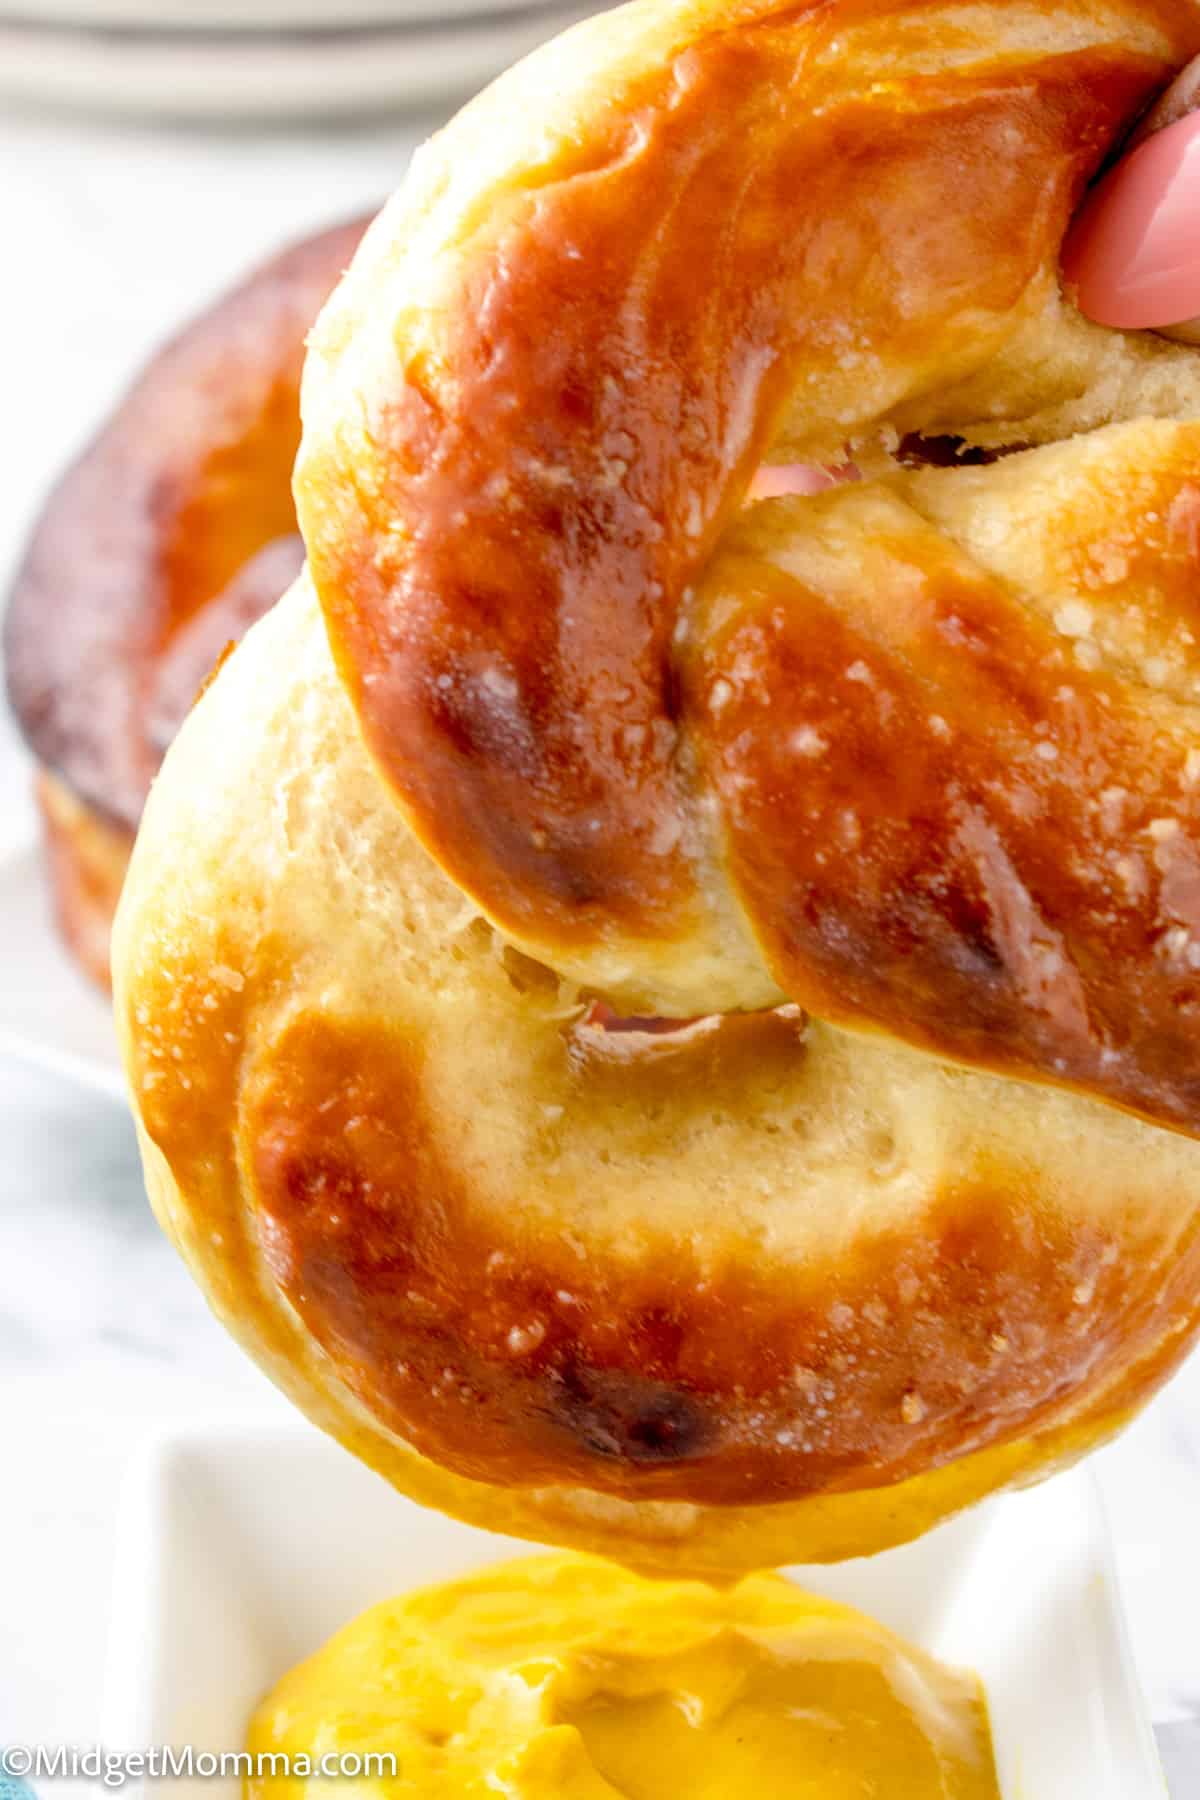 Homemade Soft Pretzel being dipped in mustard